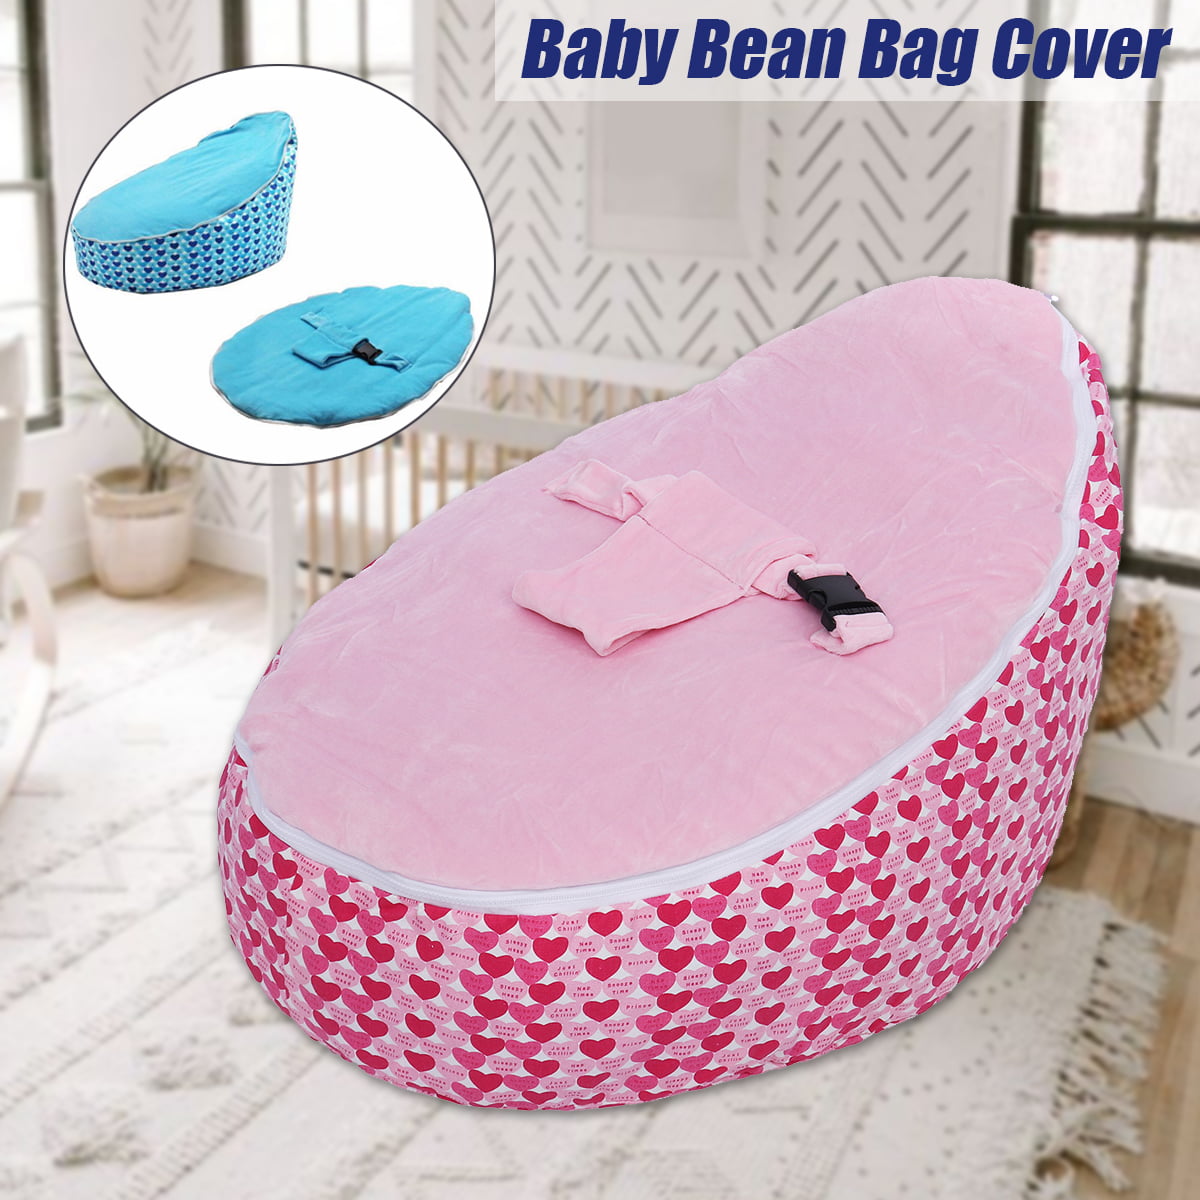 Baby Bean Bag Adjustable Harness Kids Toddler Chair Bouncer Beanbag Cover 